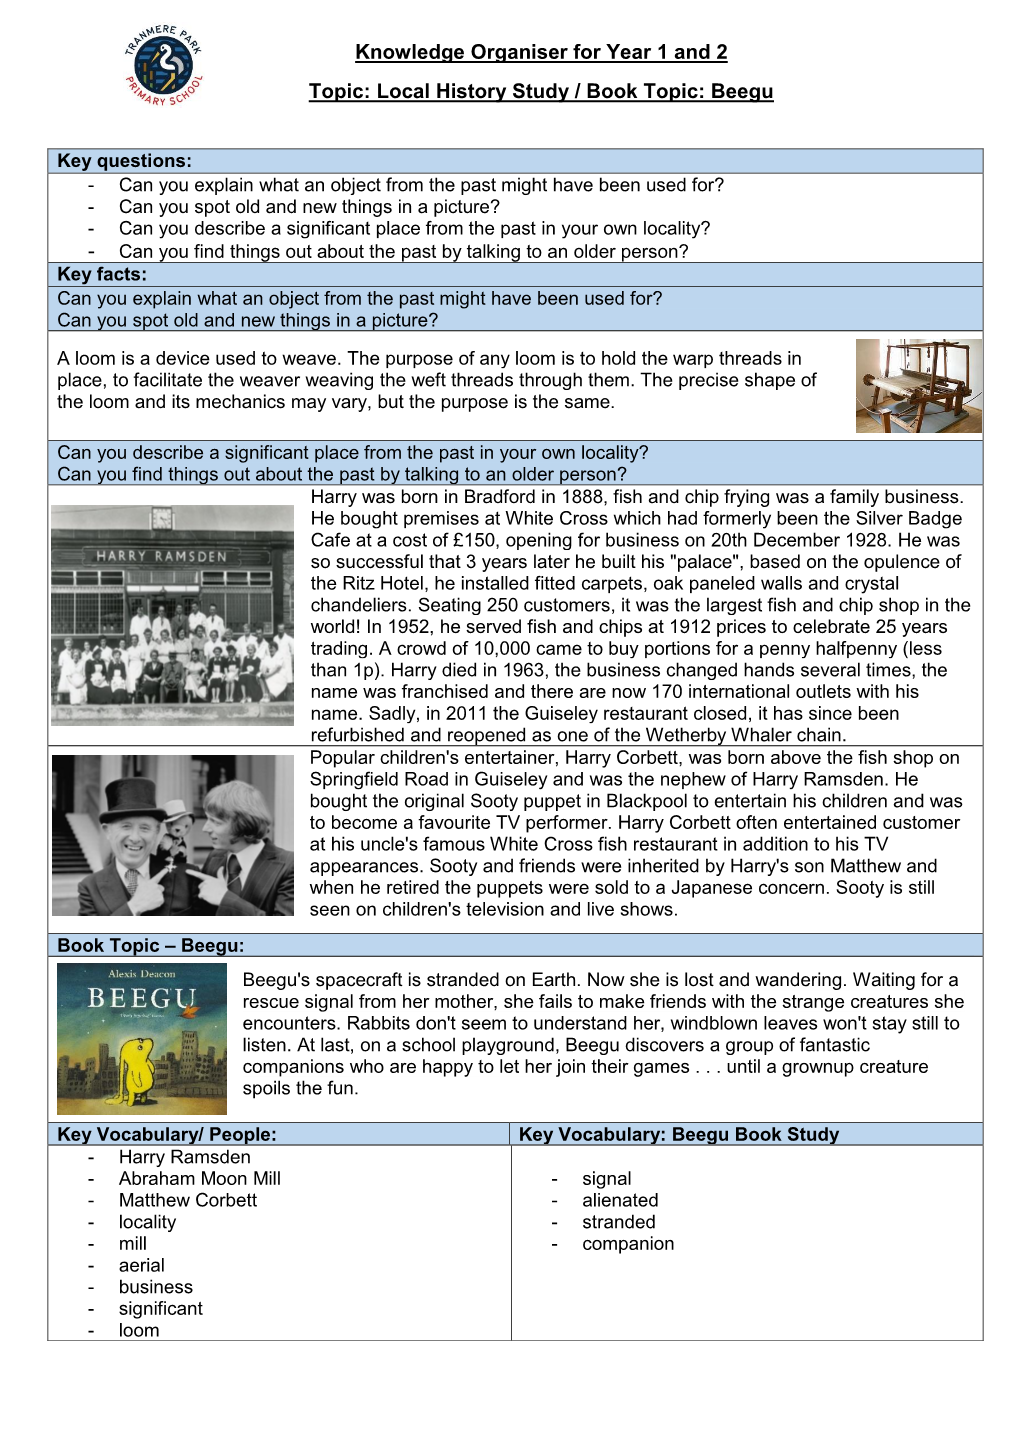 Knowledge Organiser for Year 1 and 2 Topic: Local History Study / Book Topic: Beegu